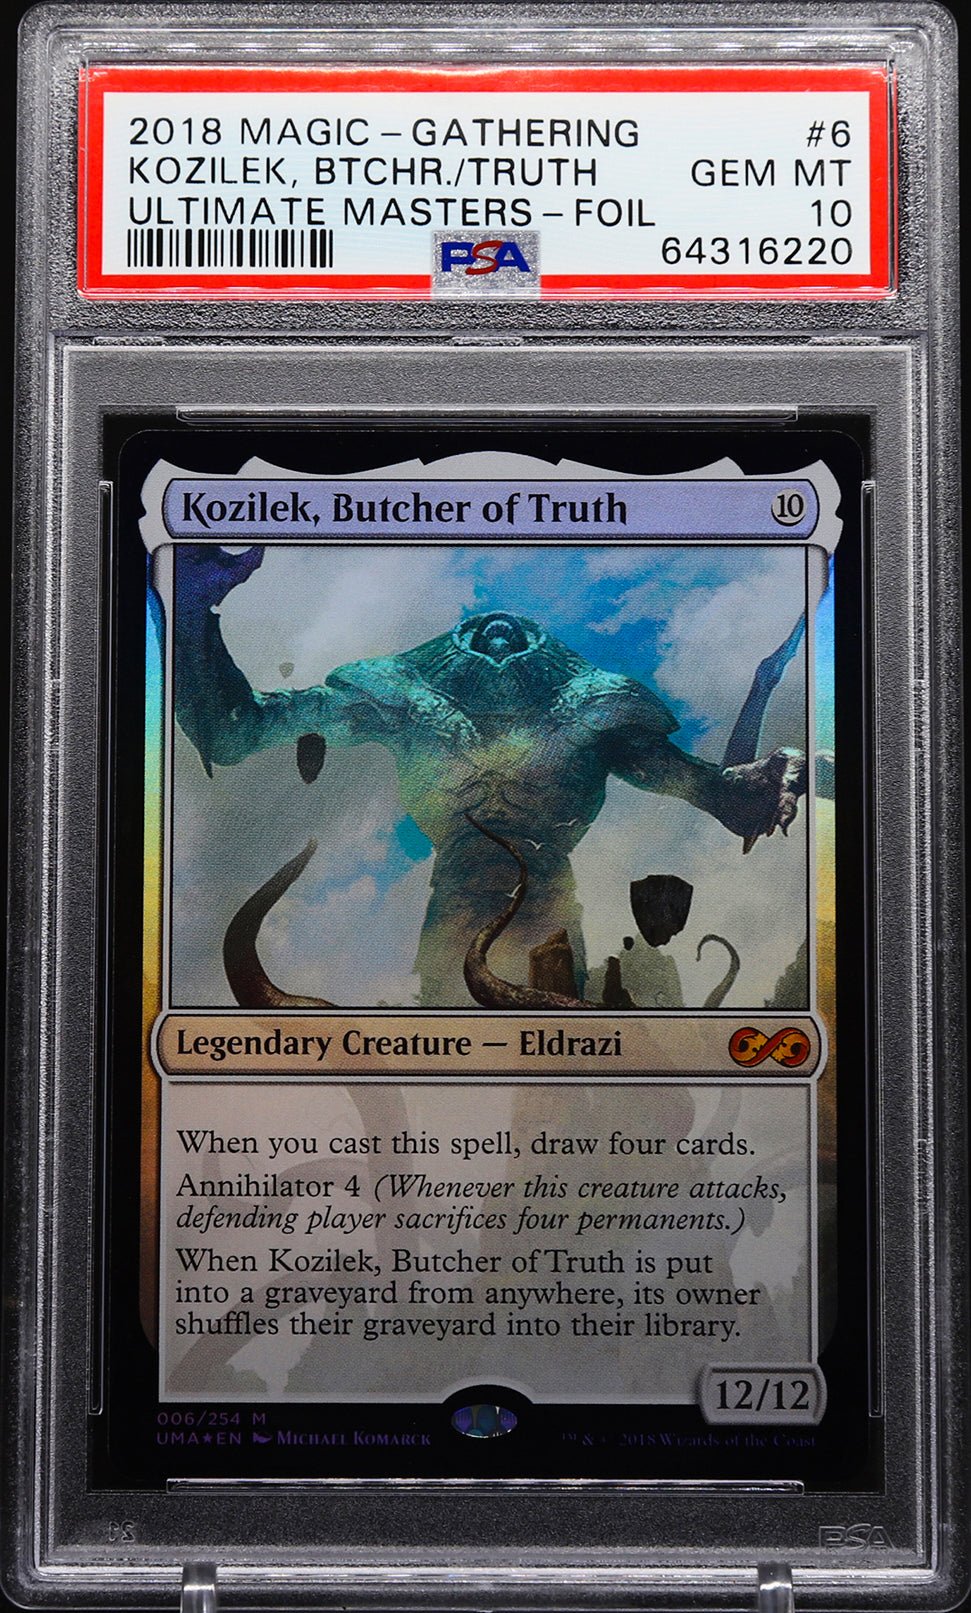 KOZILEK, BUTCHER OF TRUTH PSA 10 2018 Ultimate Masters Magic the Gathering Mythic Foil 6 Magic the Gathering Graded Cards Parallel - Hobby Gems